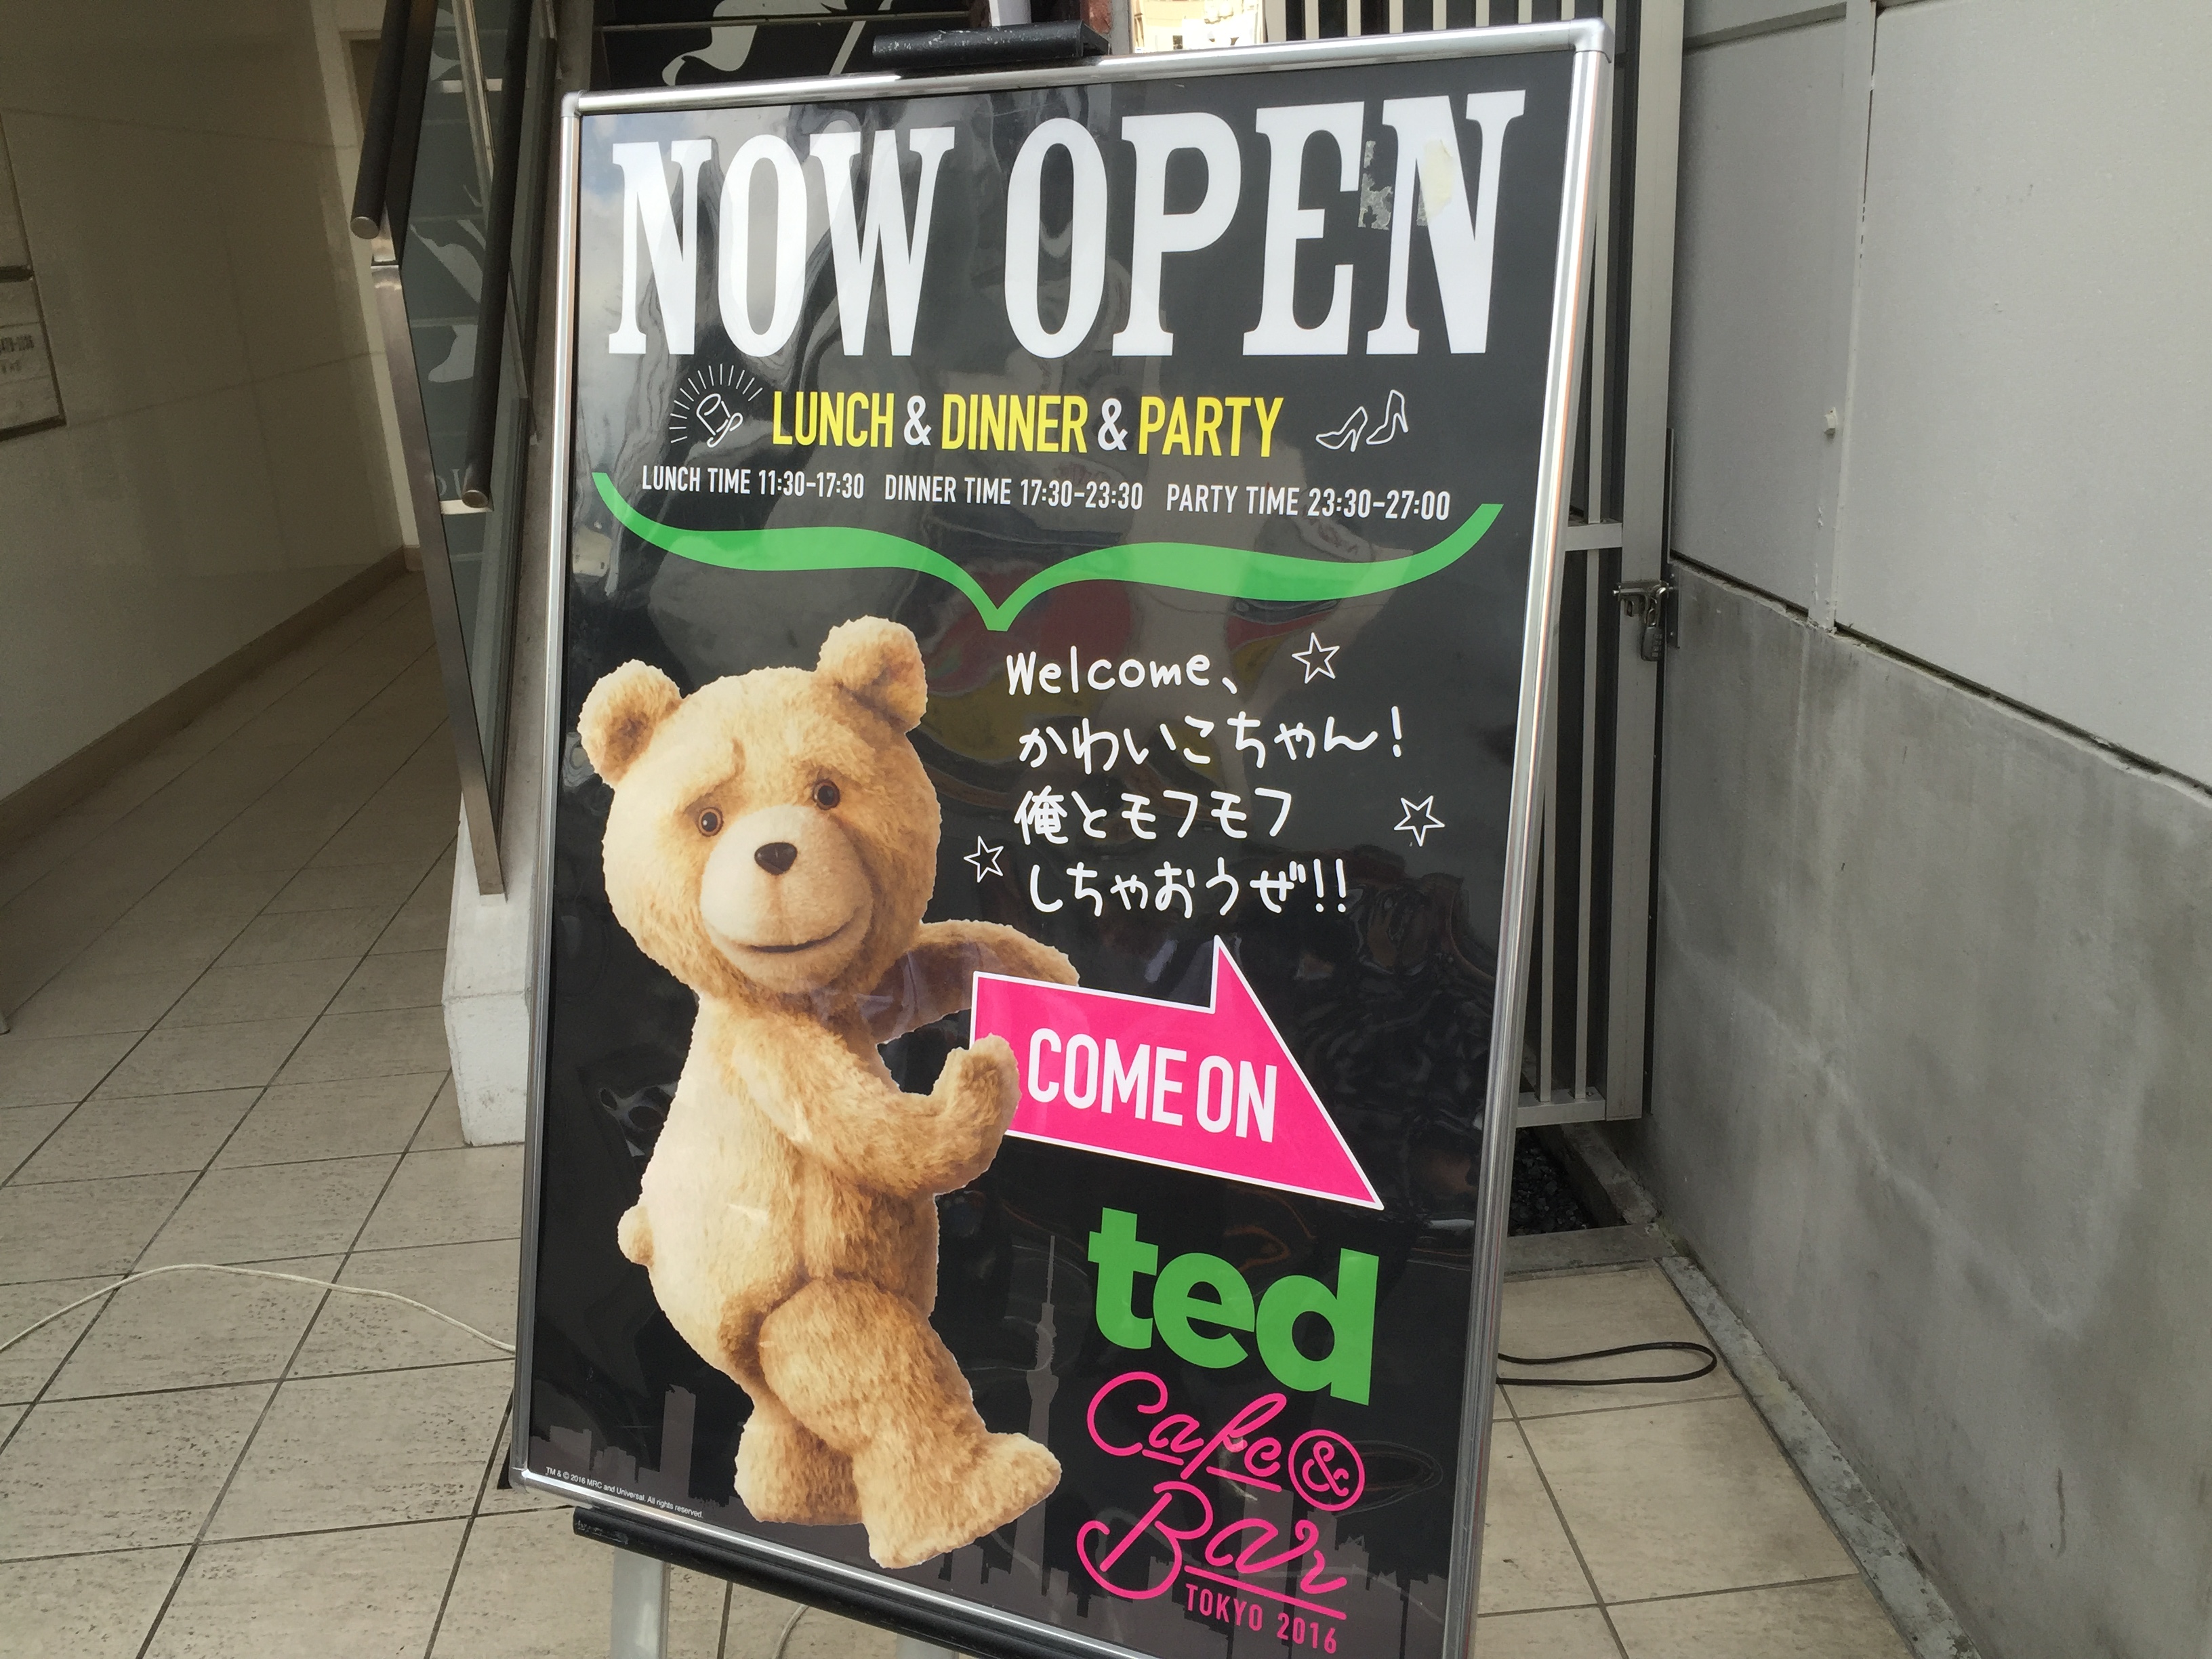 Sign for the Ted cafe in Tokyo.